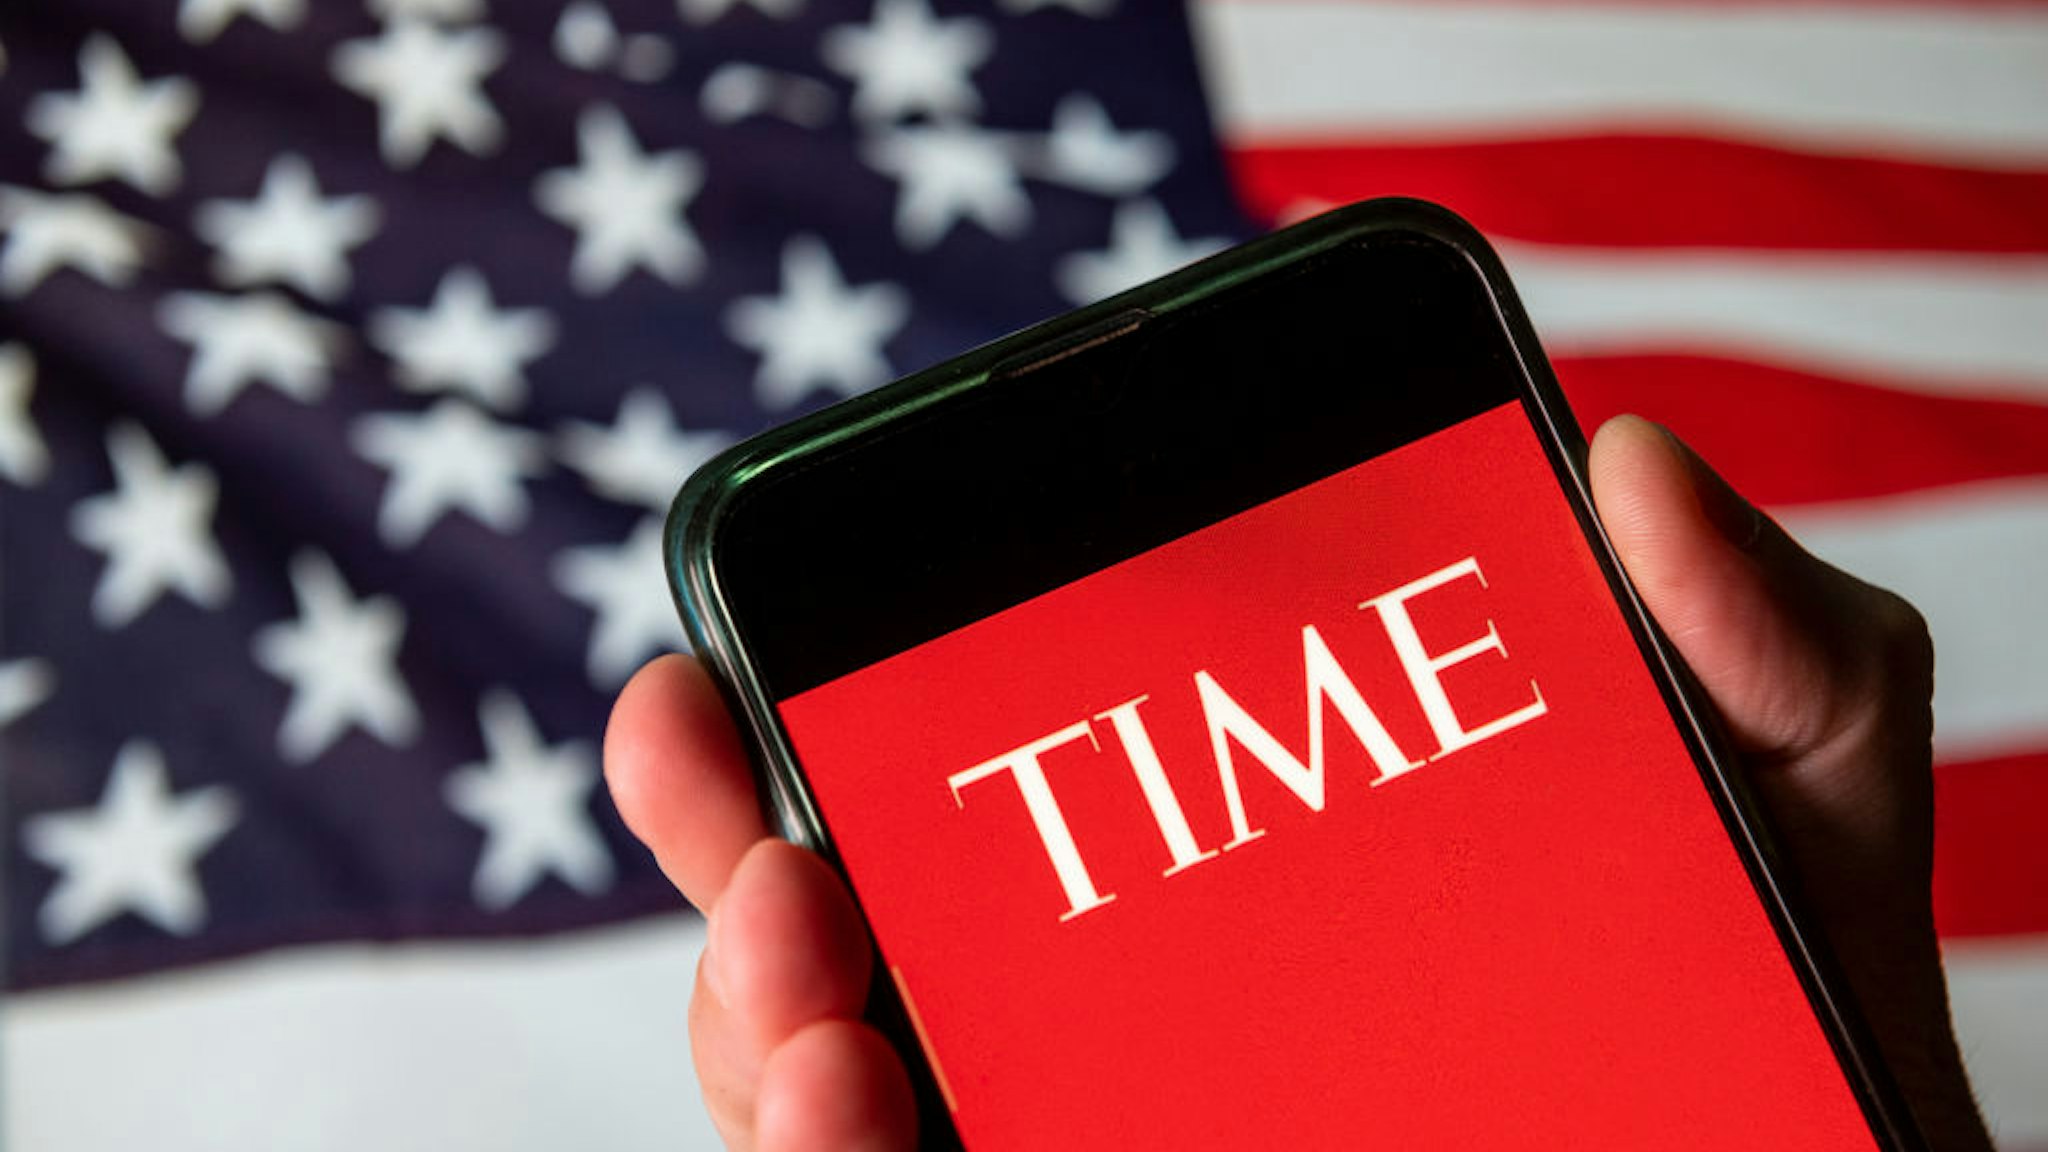 CHINA - 2020/08/13: In this photo illustration the American weekly news magazine and news website Time logo is seen on an Android mobile device with United States of America flag in the background.